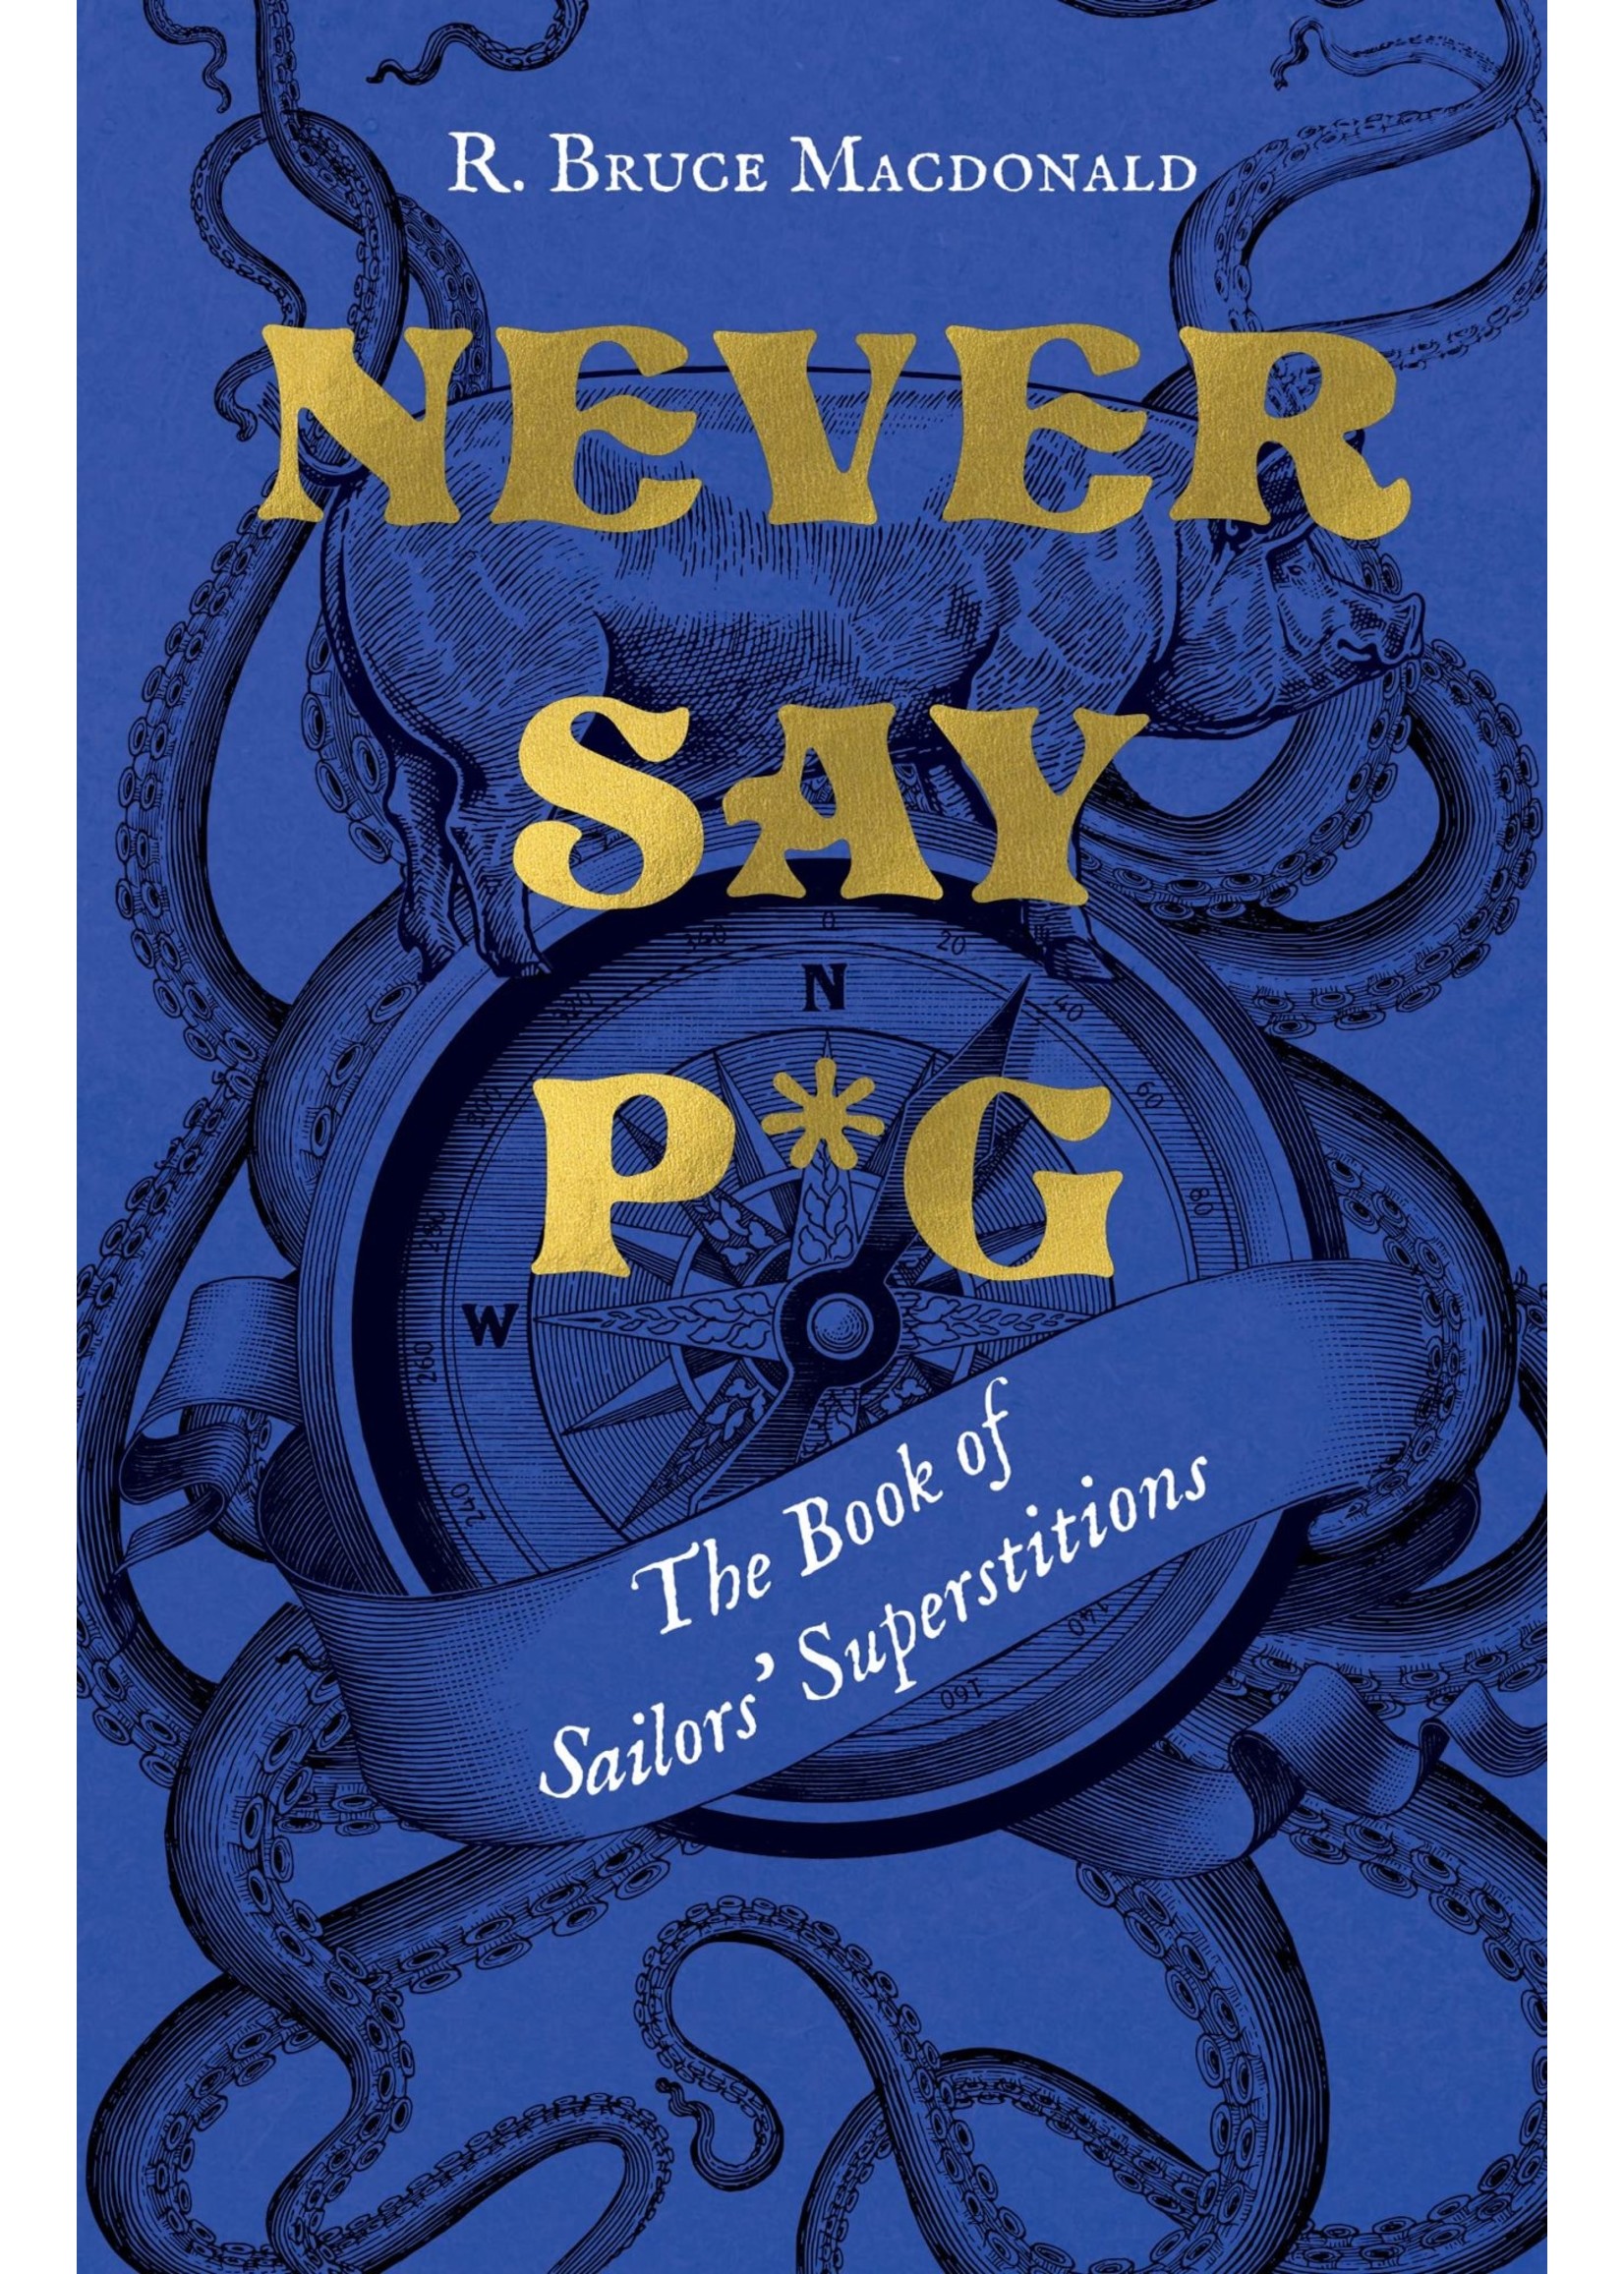 Never Say P*g: The Book of Sailors’ Superstitions by R. Bruce Macdonald